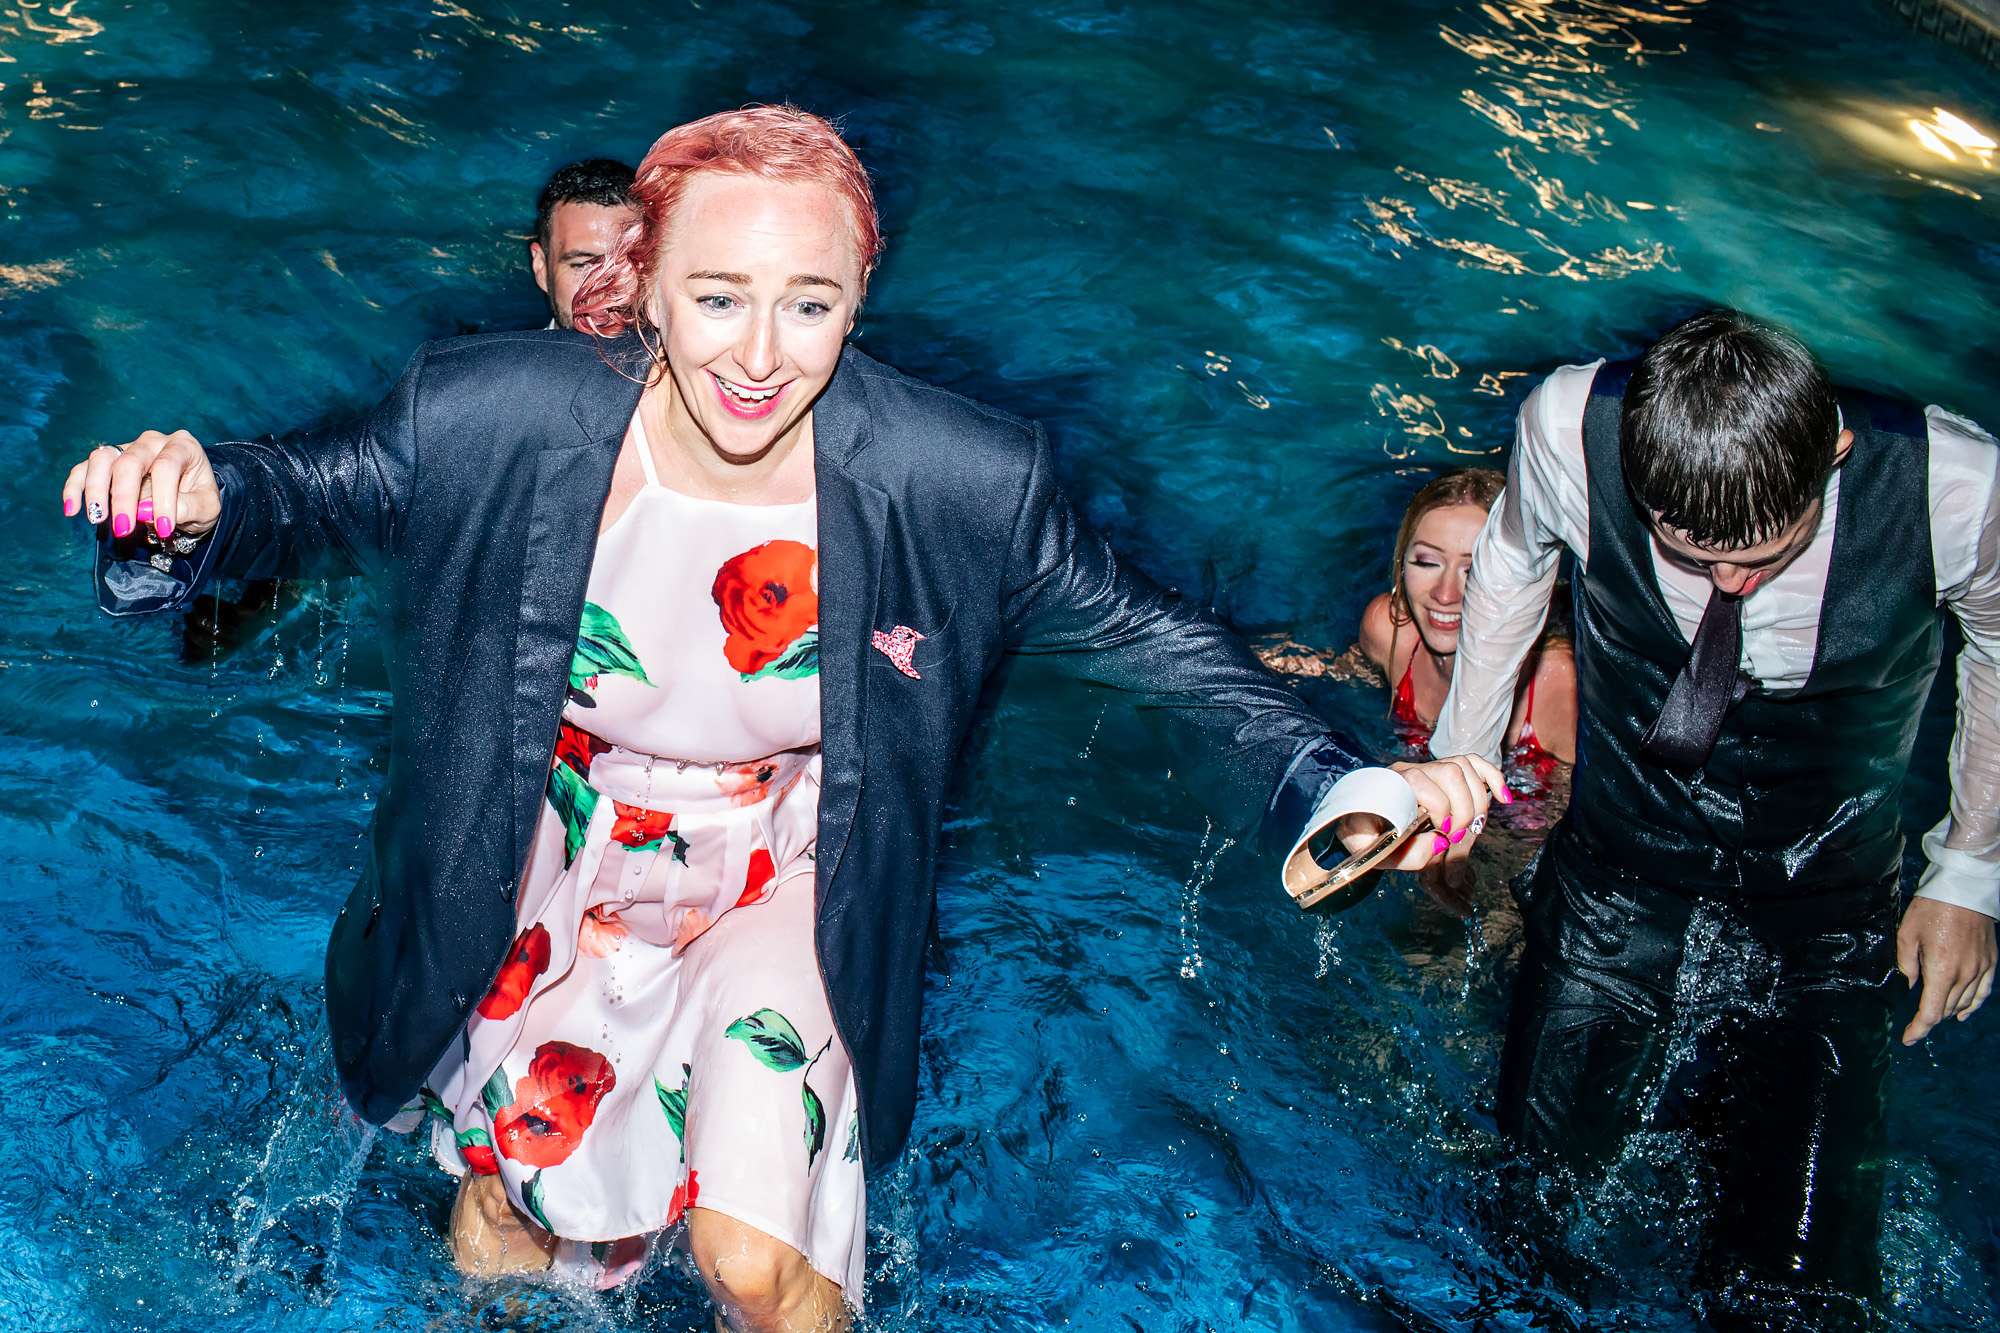 Wedding guests in the pool fully clothed